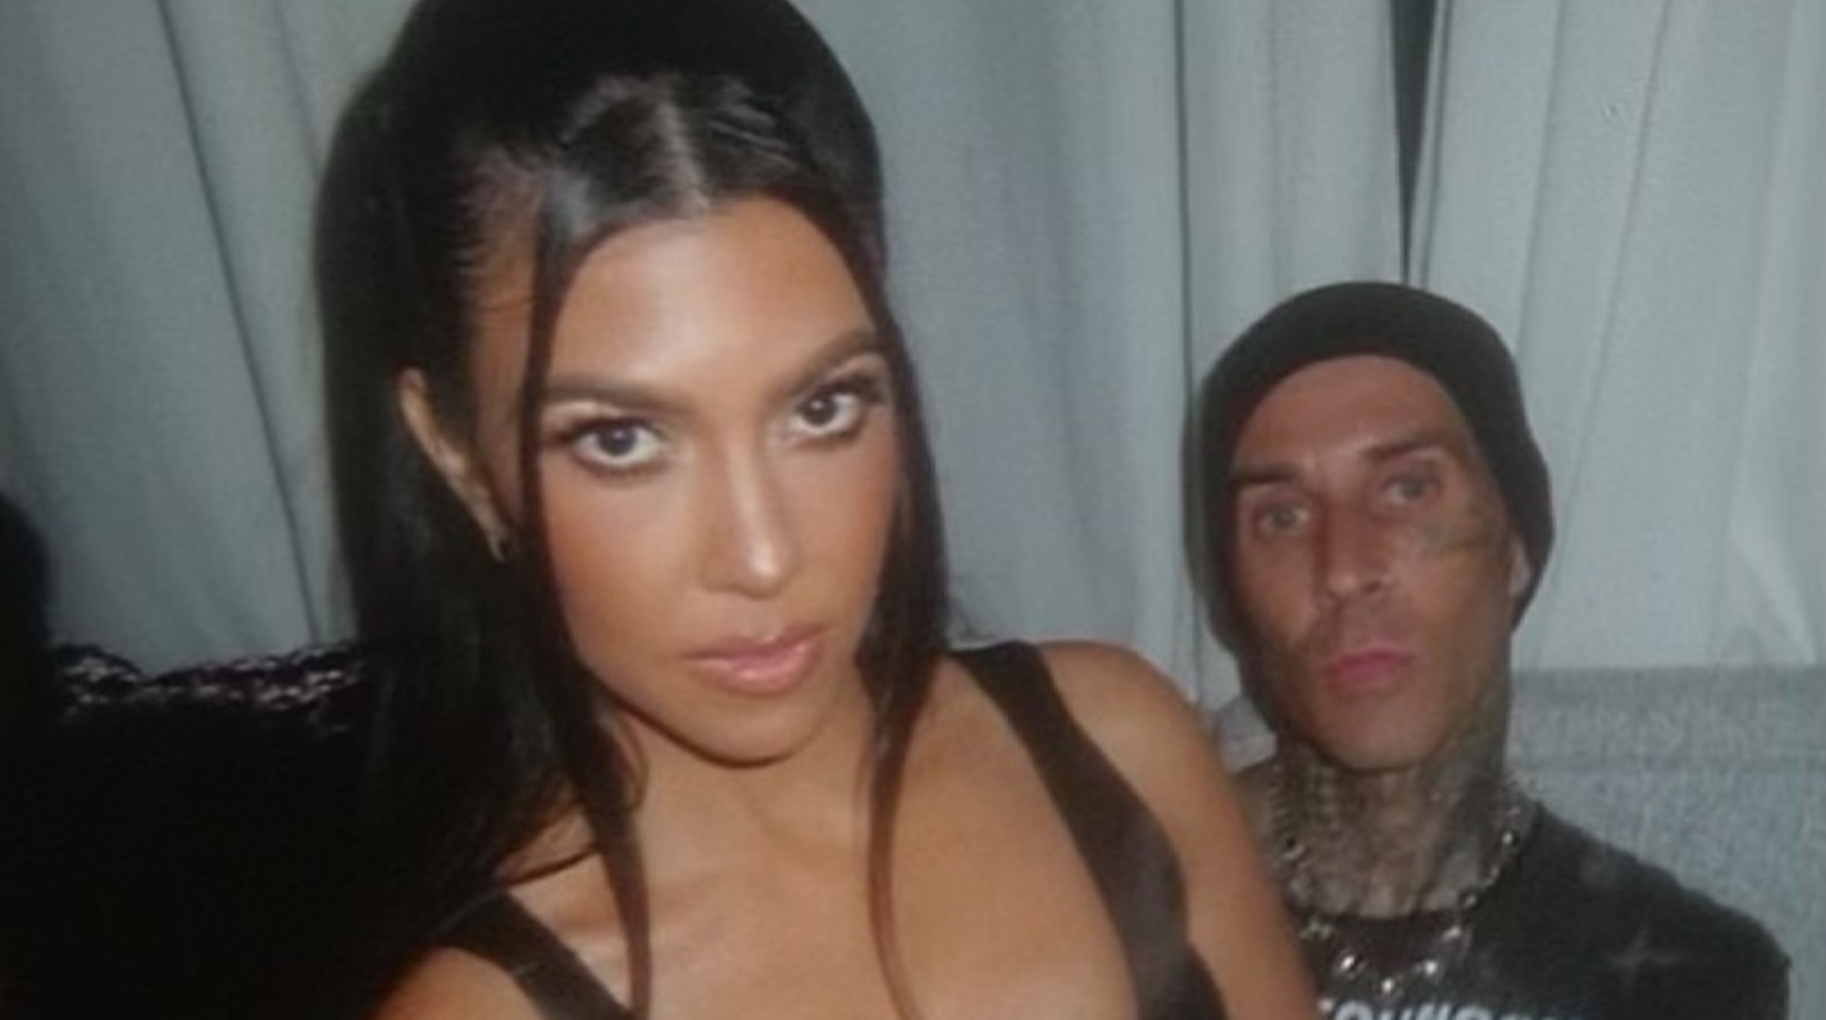 Travis Barker Responds to Rumors He Has a Thing for Kourtney Kardashian's Sister Kim | Over the last several months, rumors have swirled about a potential love triangle between Travis Barker his wife Kourtney Kardashian, and her sister Kim Kardashian. Yes, really.